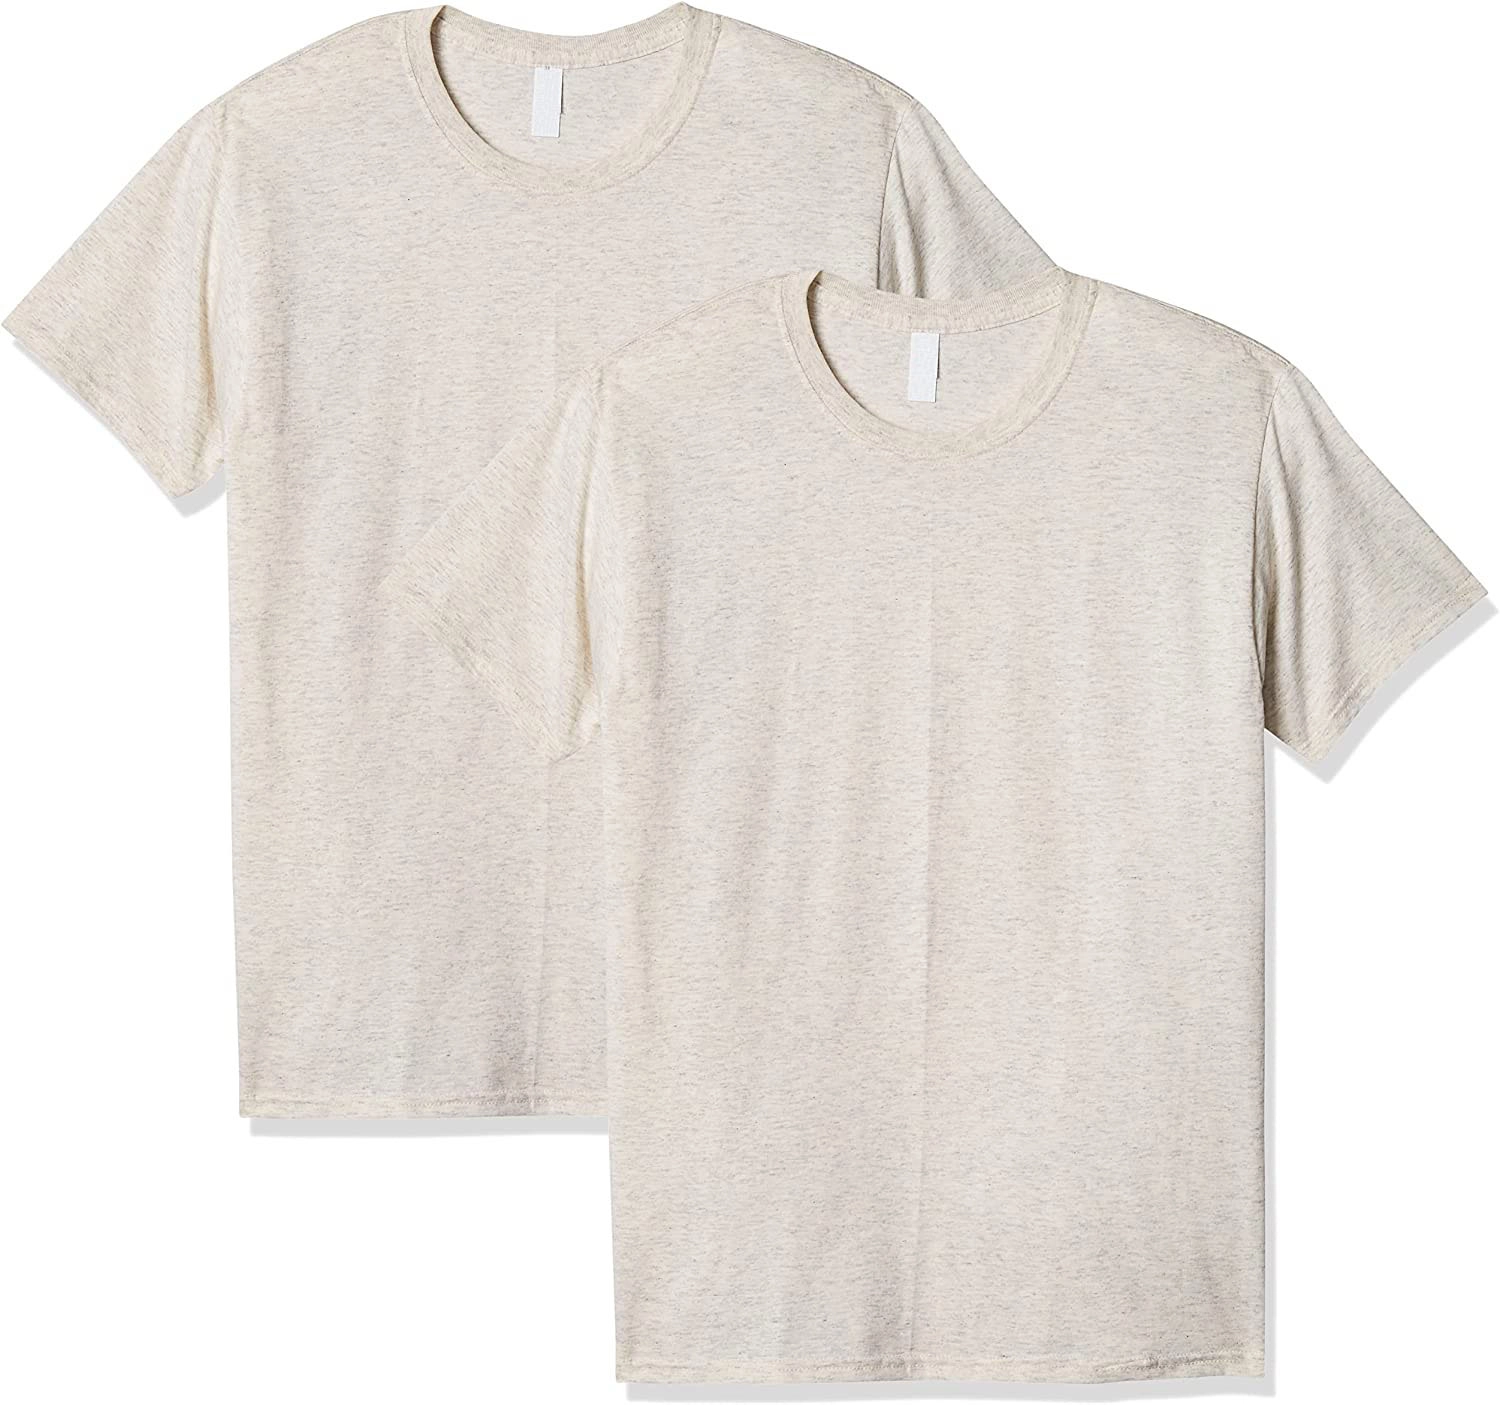 best blank t-shirts for embroidery - Bangladesh Factory, Suppliers, Manufacturers